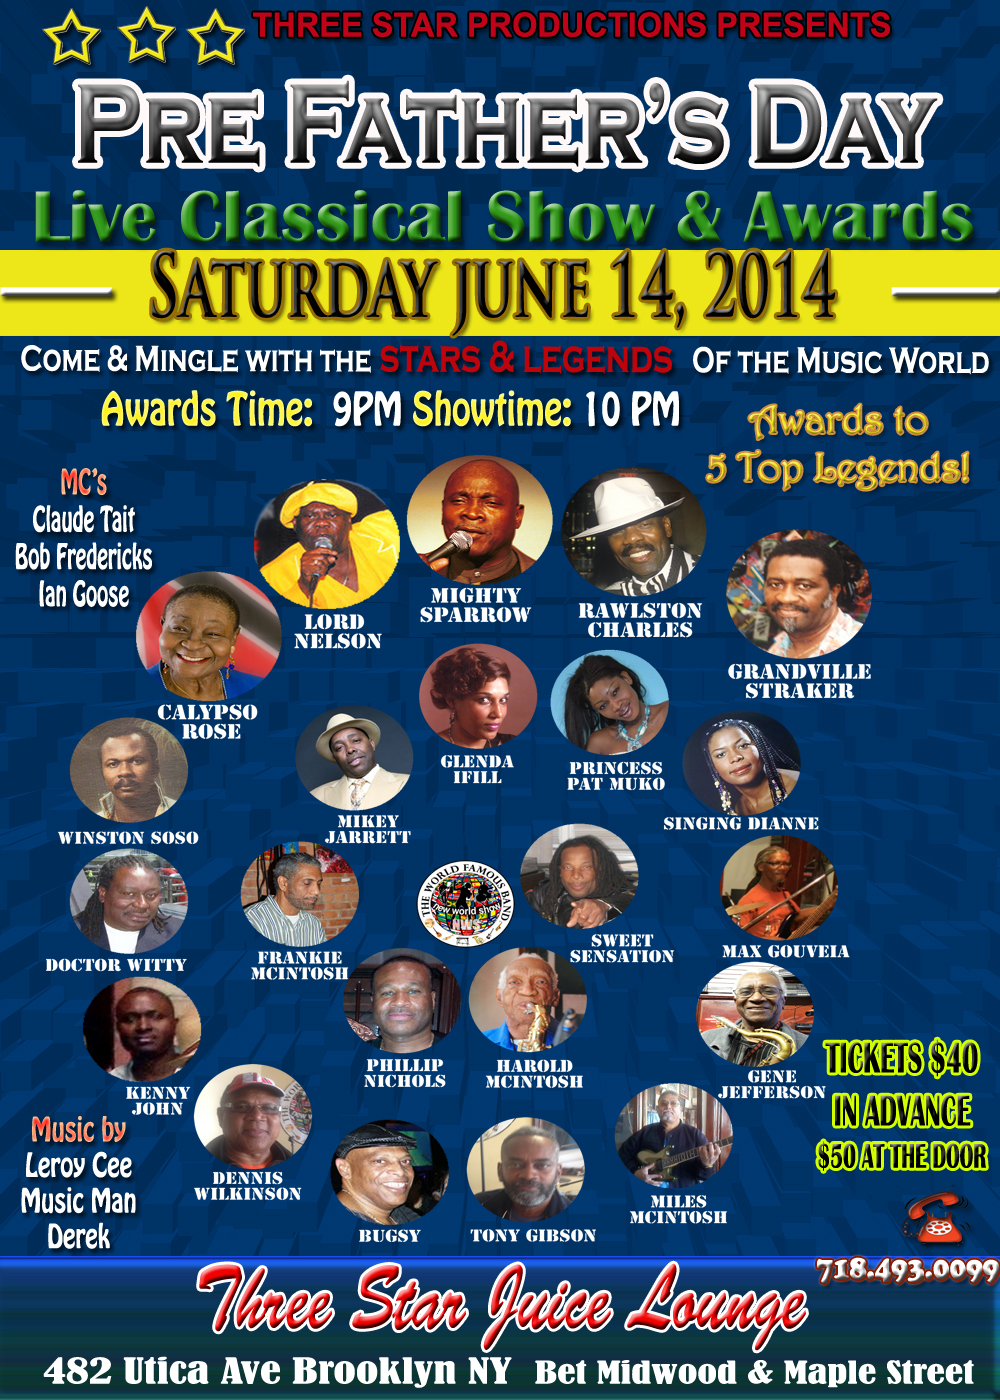 Pre-Fathers Day Live Classical Show & Awards